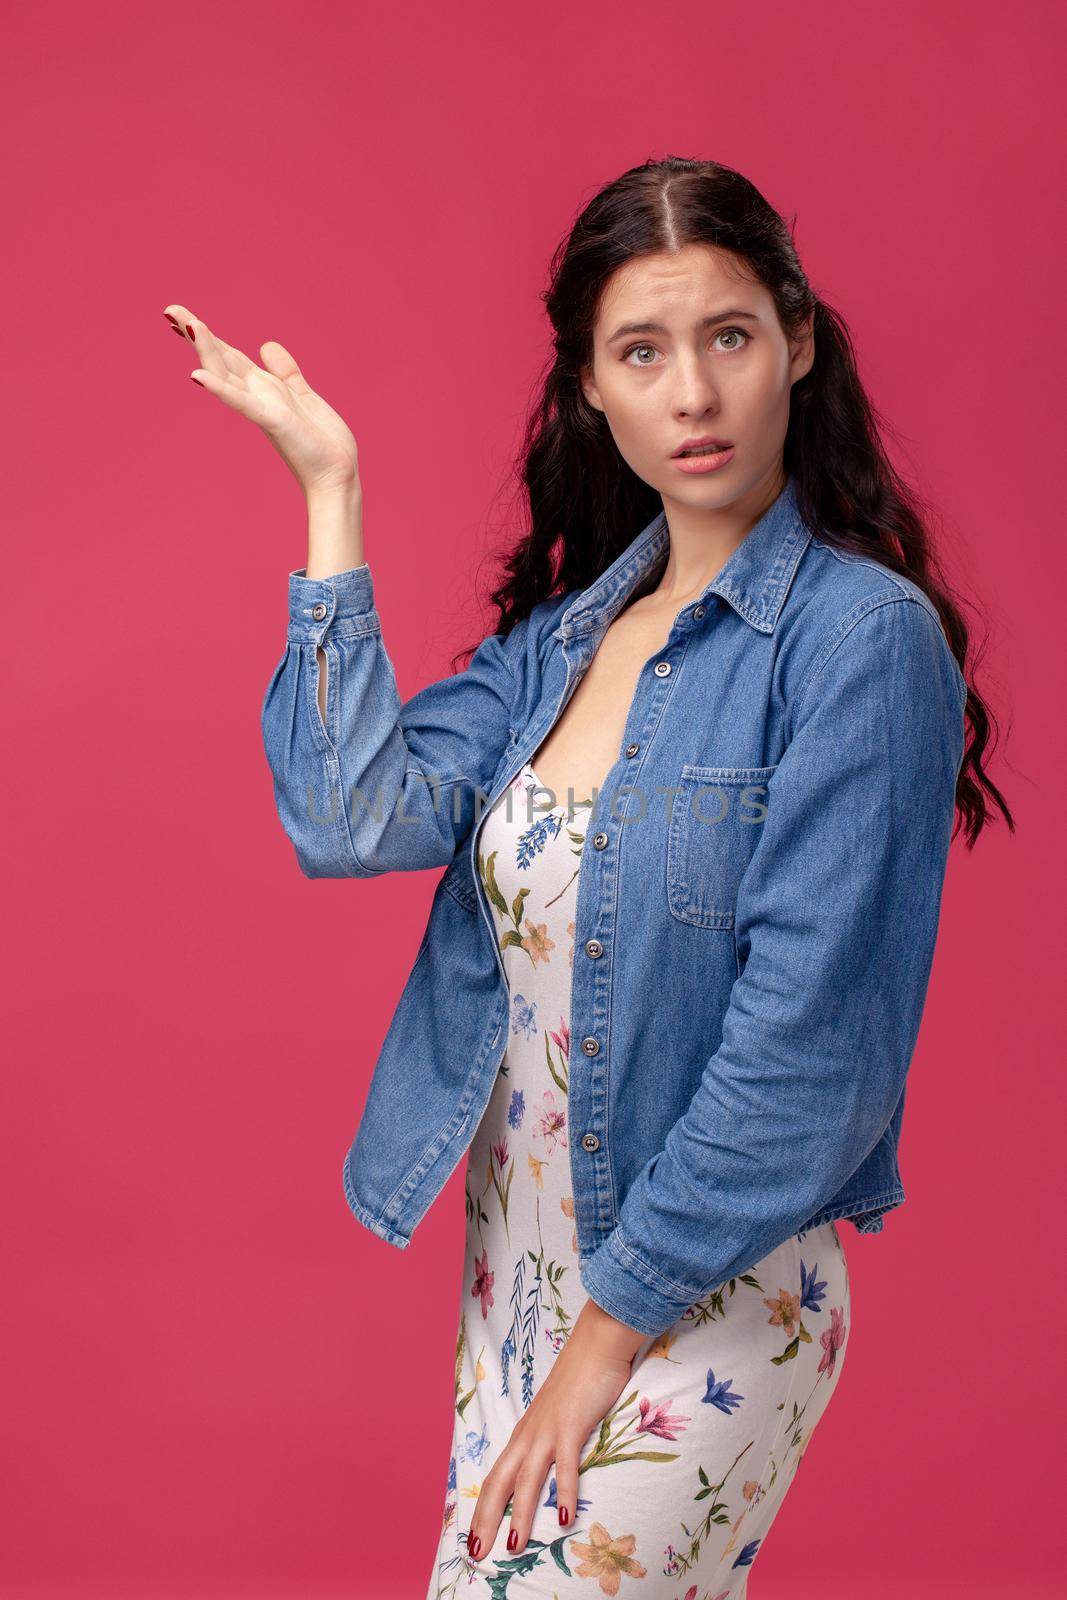 Portrait of a pretty young female in a white dress with floral print and blue denim shirt standing on a pink wall background in studio. She is looking confused. People sincere emotions, lifestyle concept. Mockup copy space.